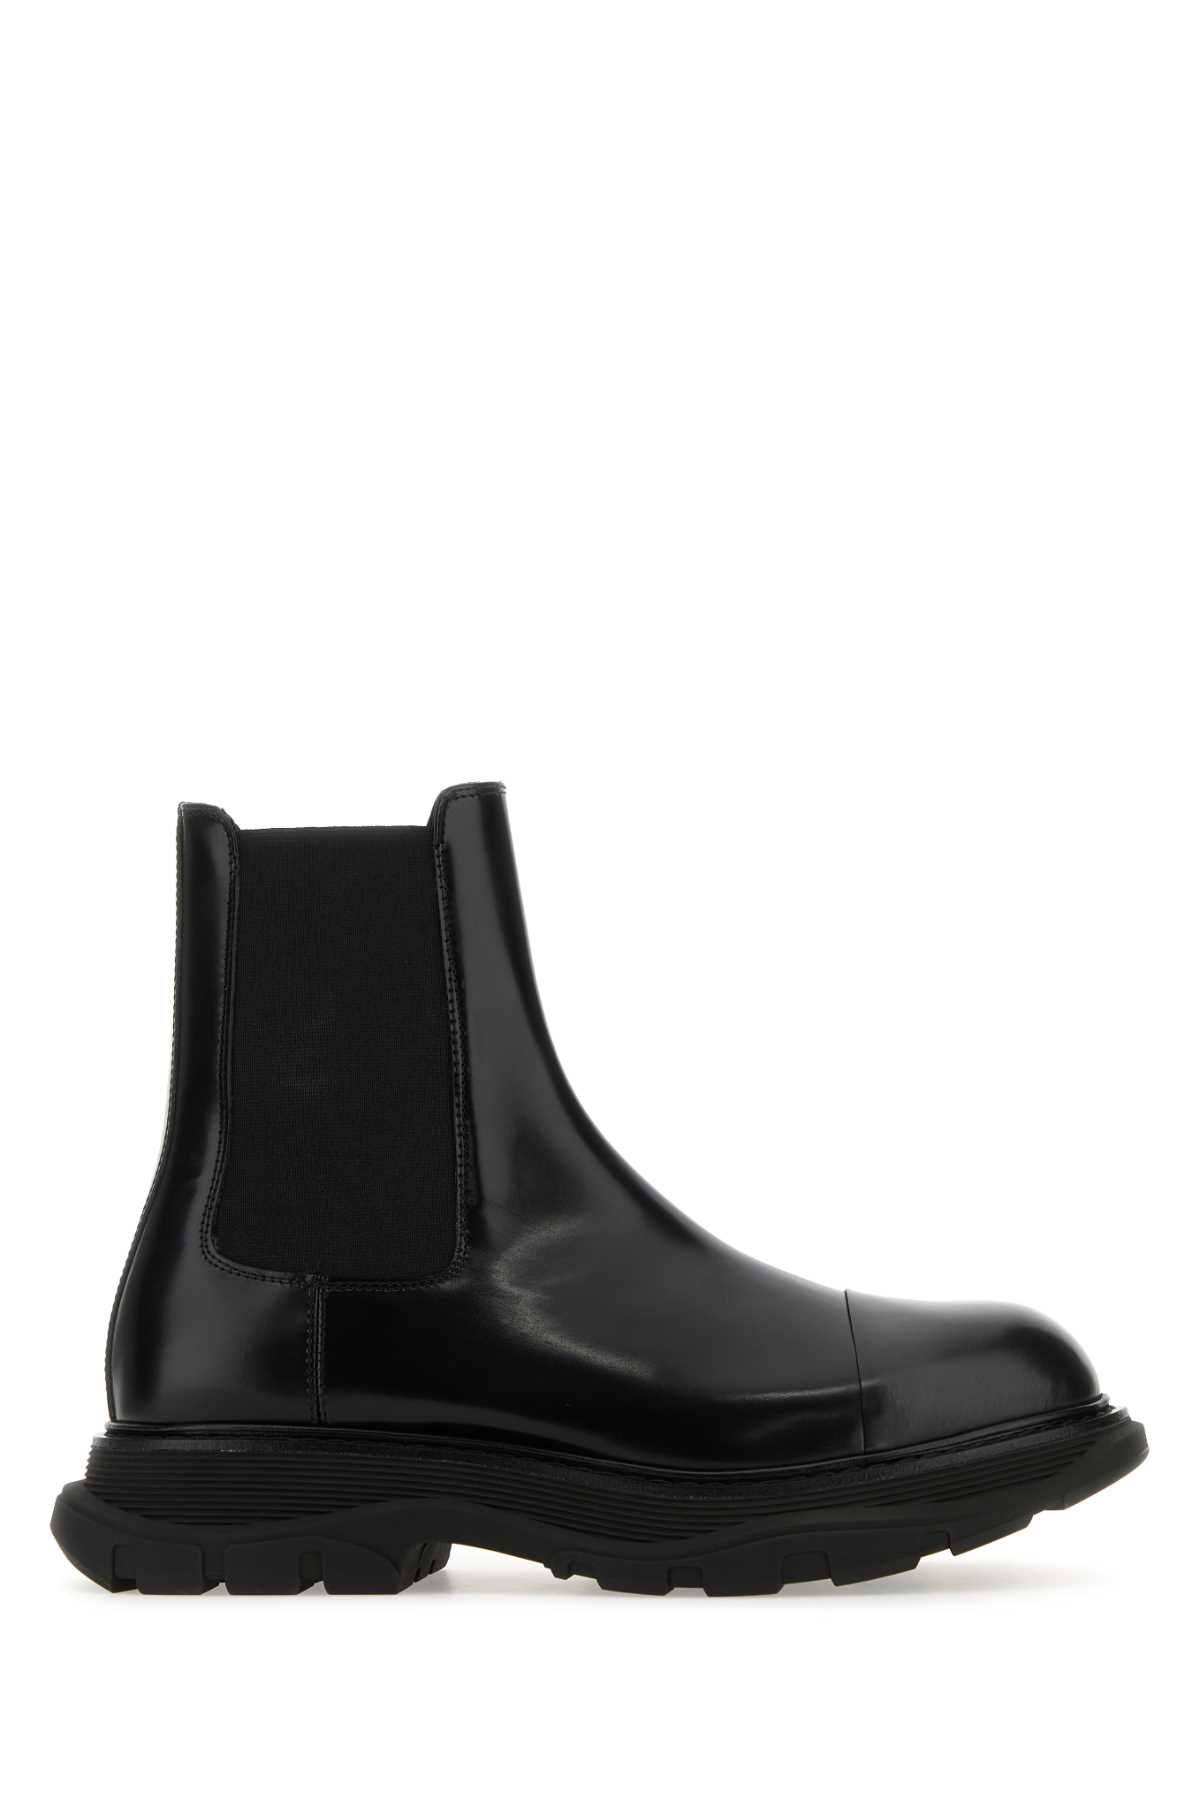 Alexander McQueen Black Leather Chelsea Tread Ankle Boots